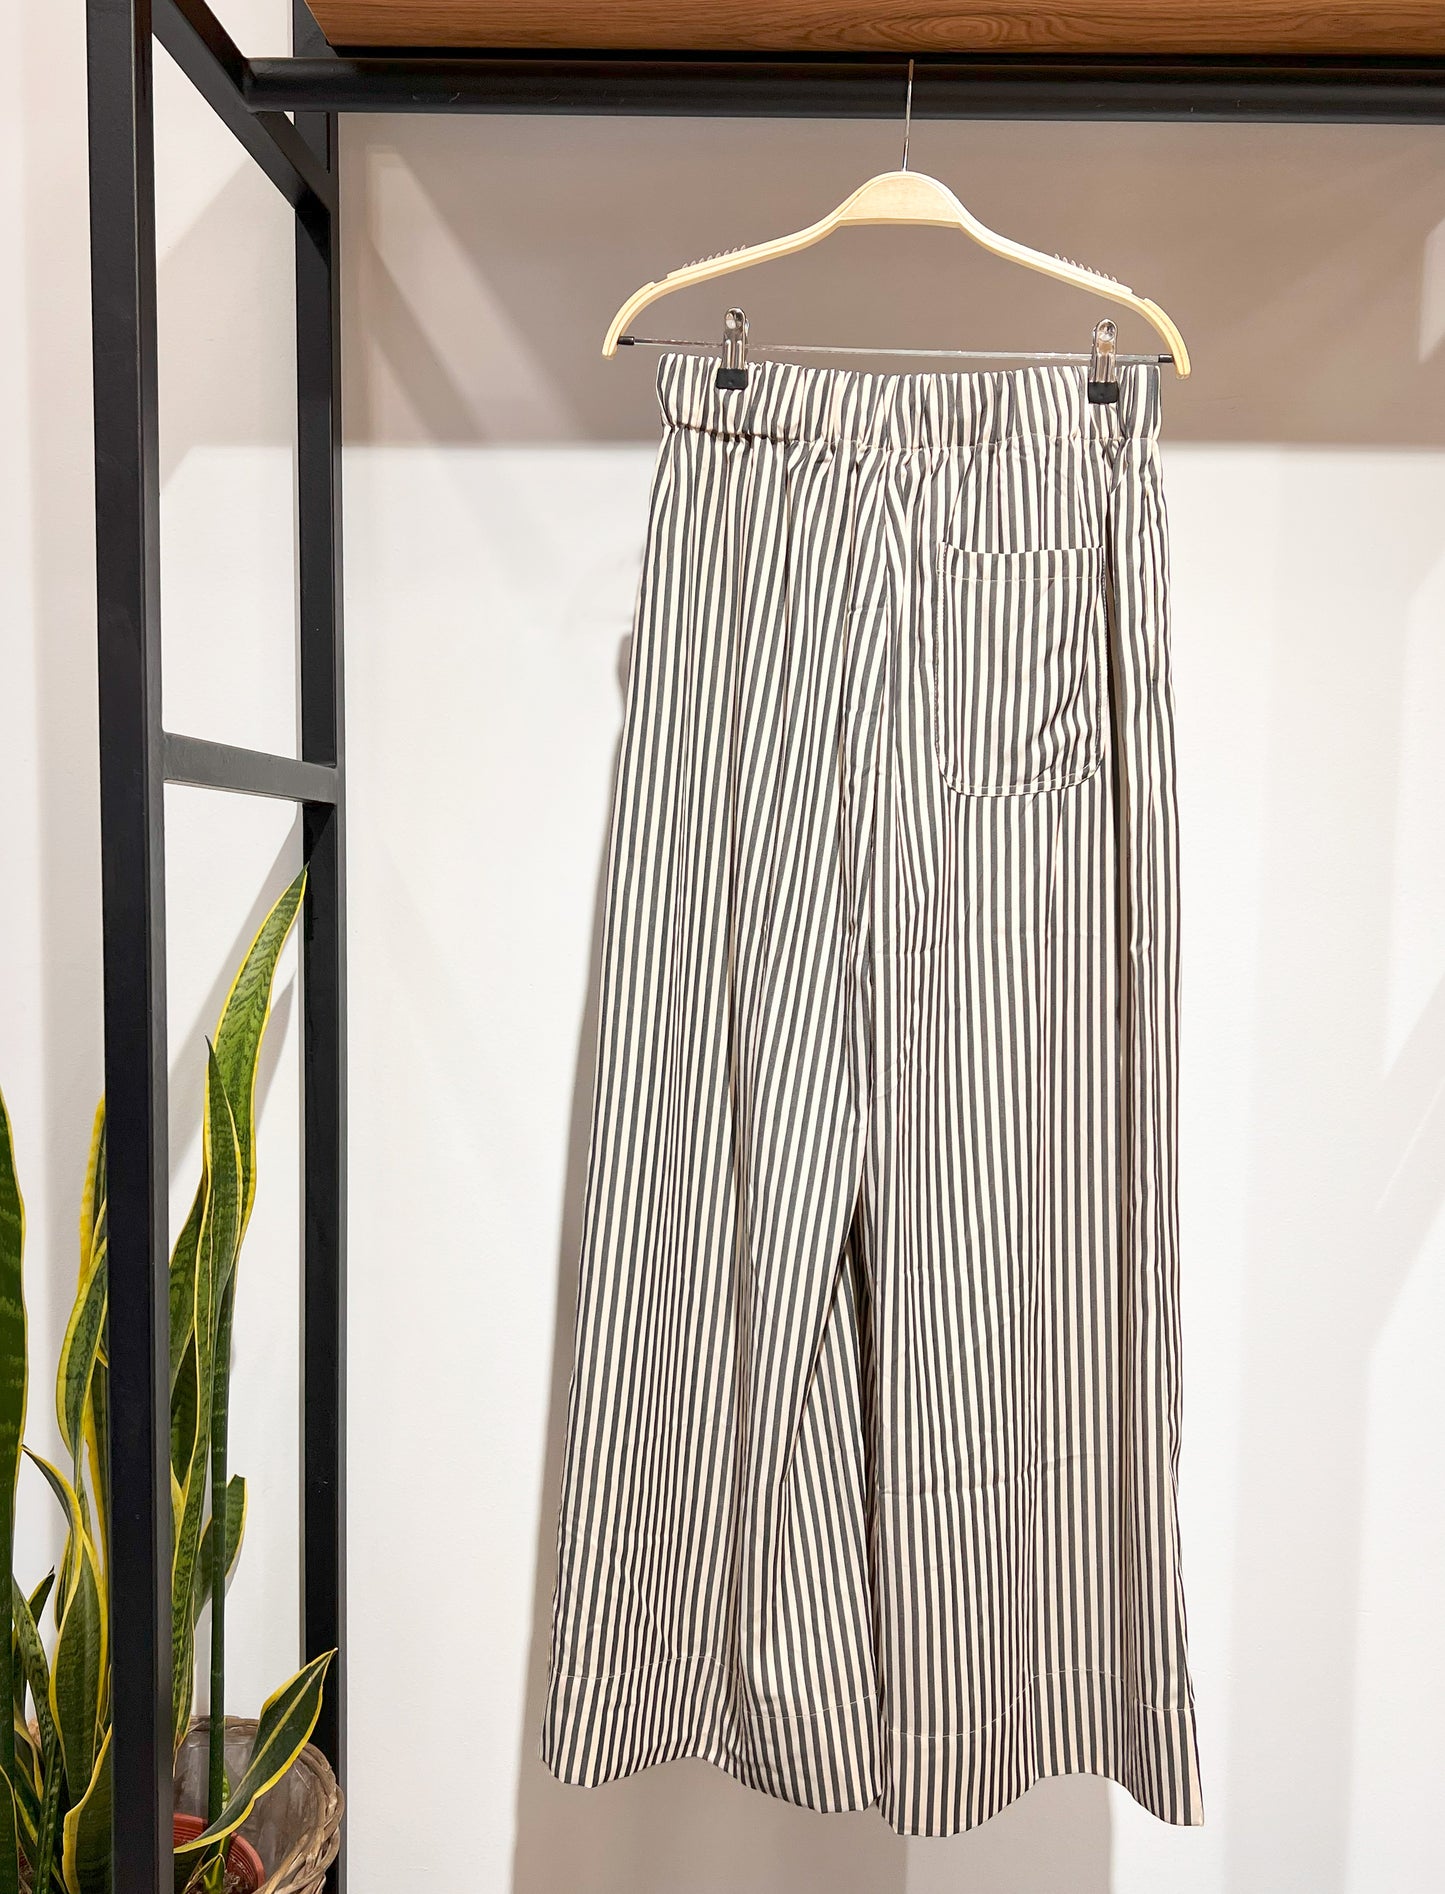 The Striped Trousers